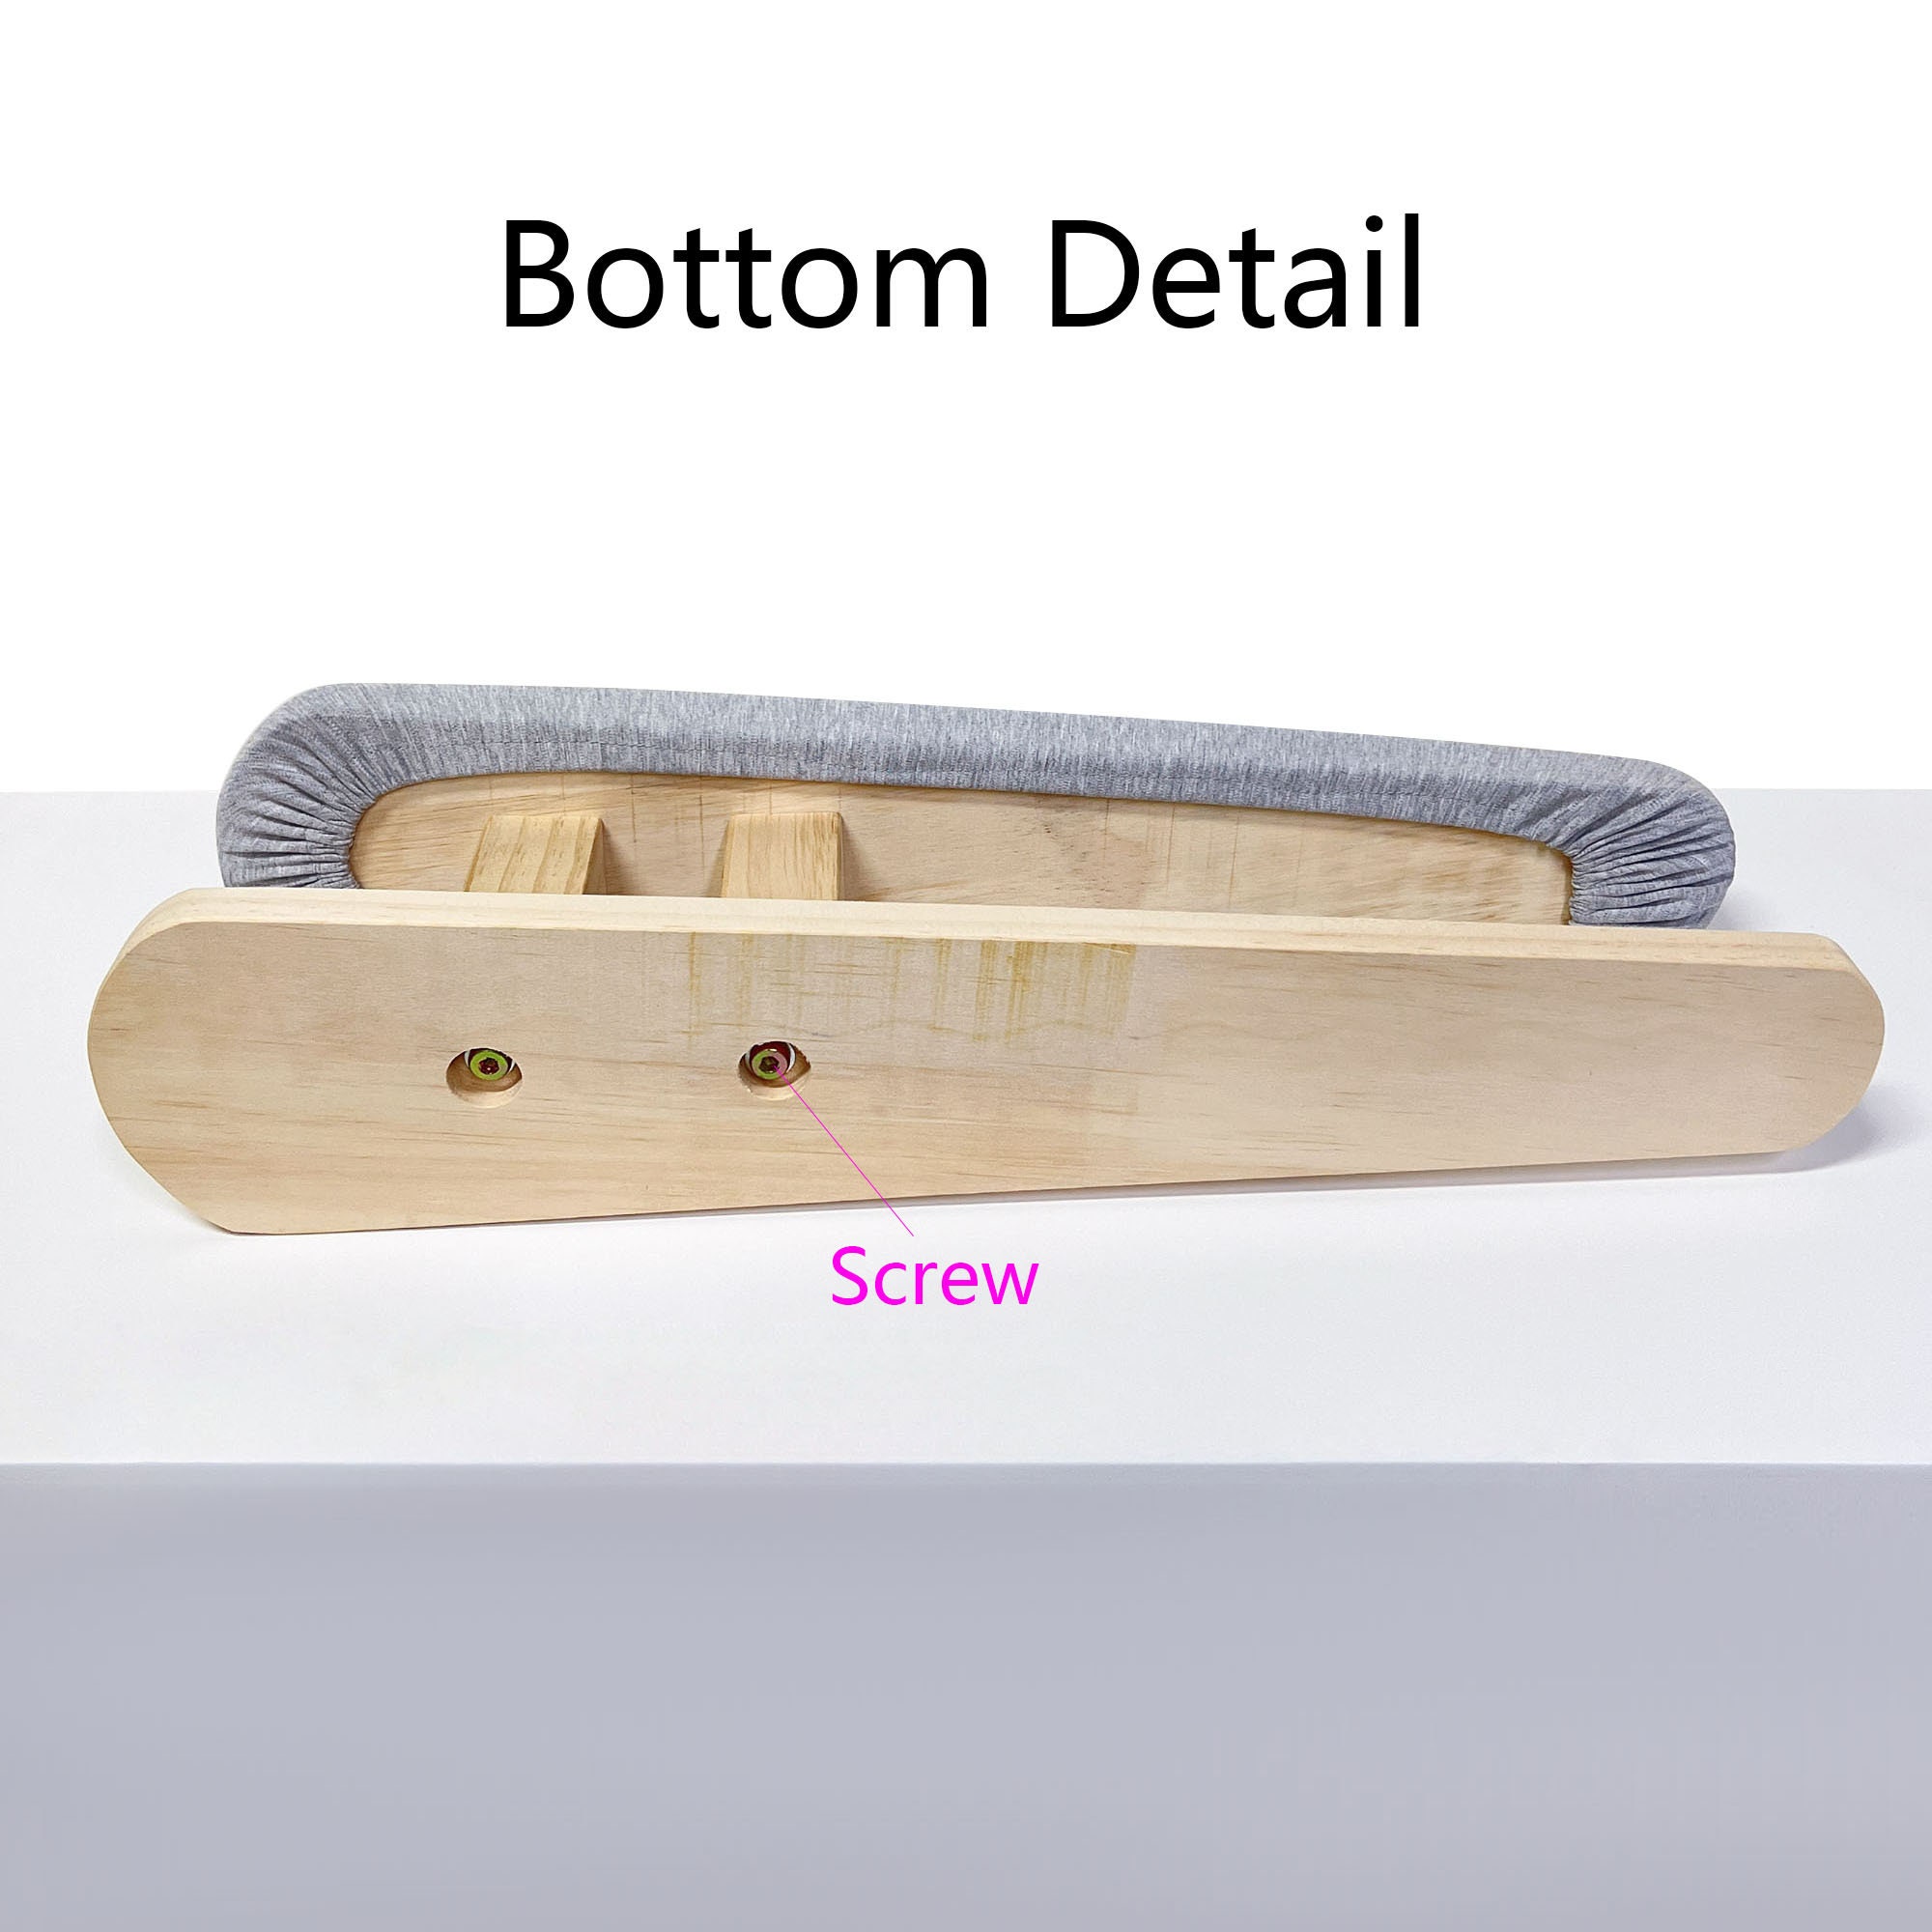 Gray Wooden Ironing Stool Special Clothes Tailor Ironing Board Miniature  Sleeve Board Household Pressing Board Multi-functional Thickened 